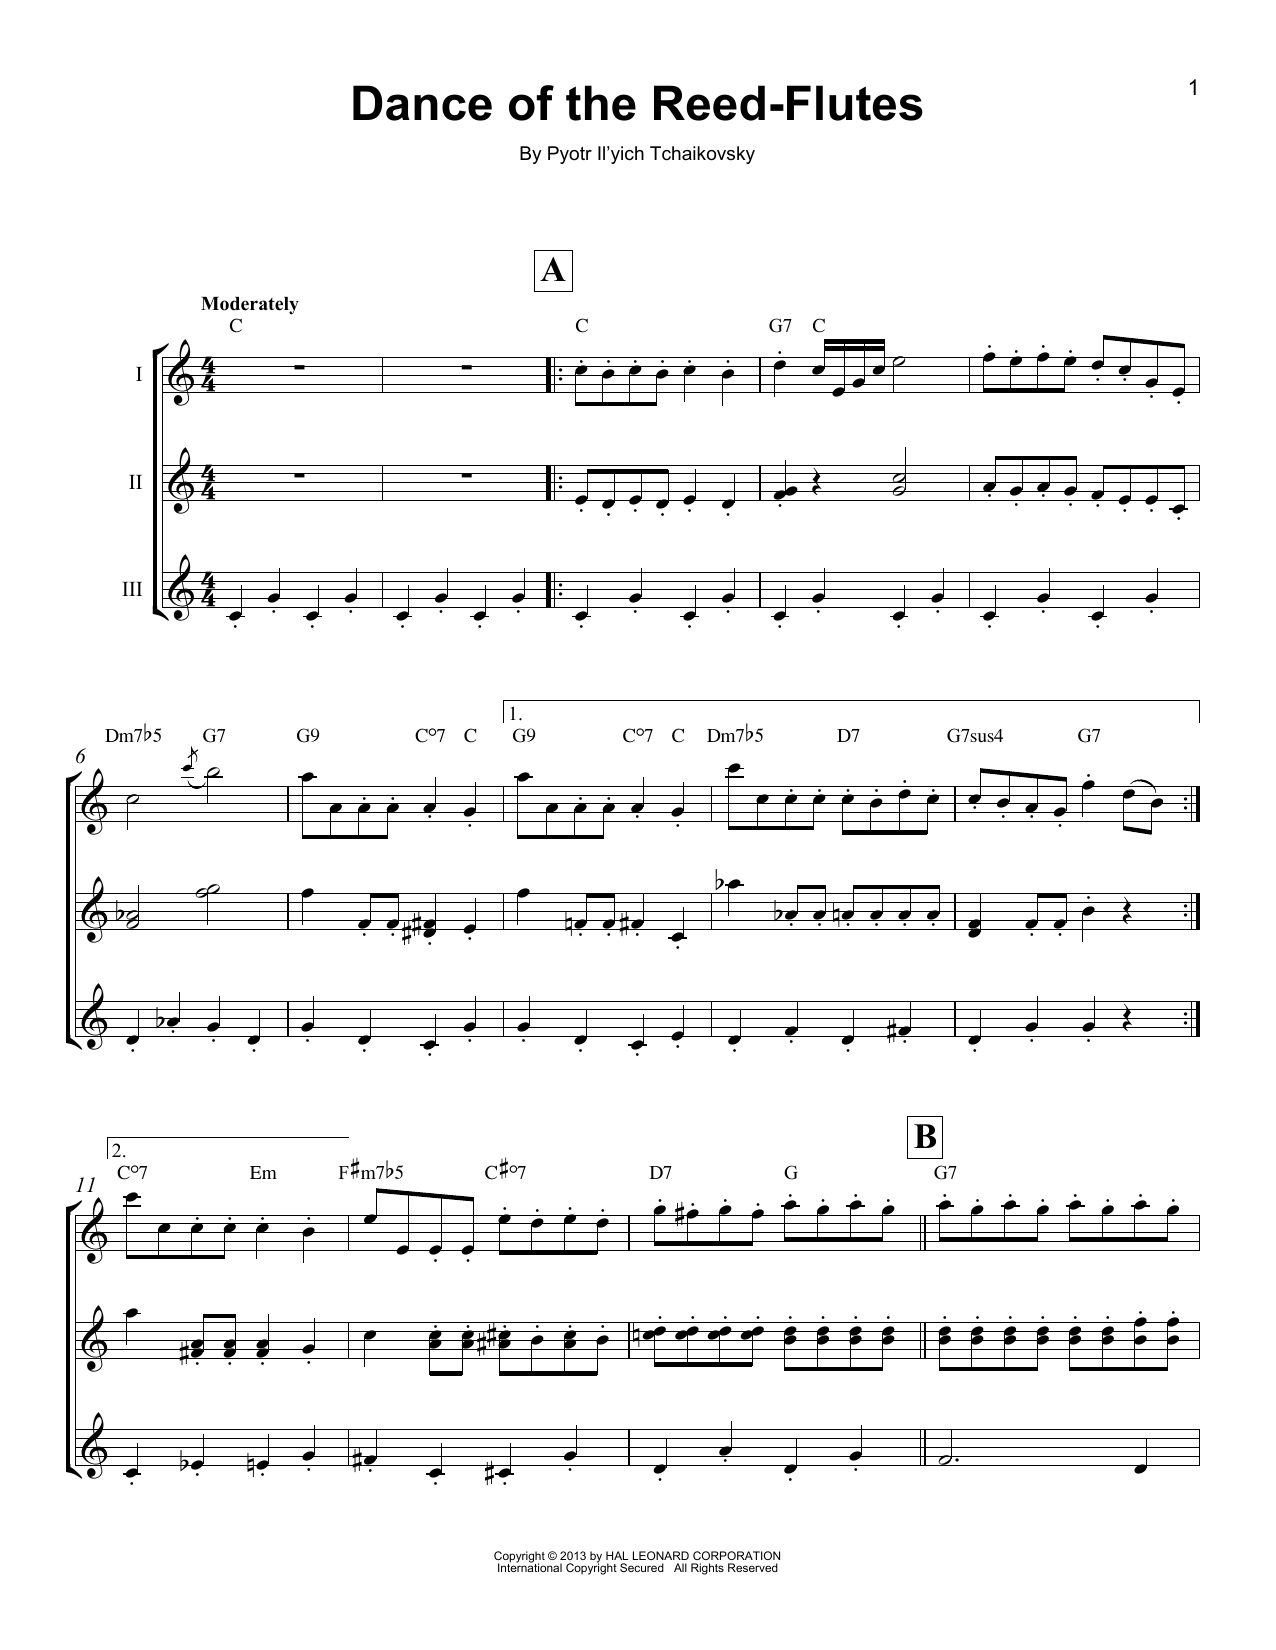 Download Pyotr Il'yich Tchaikovsky Dance Of The Reed-Flutes Sheet Music